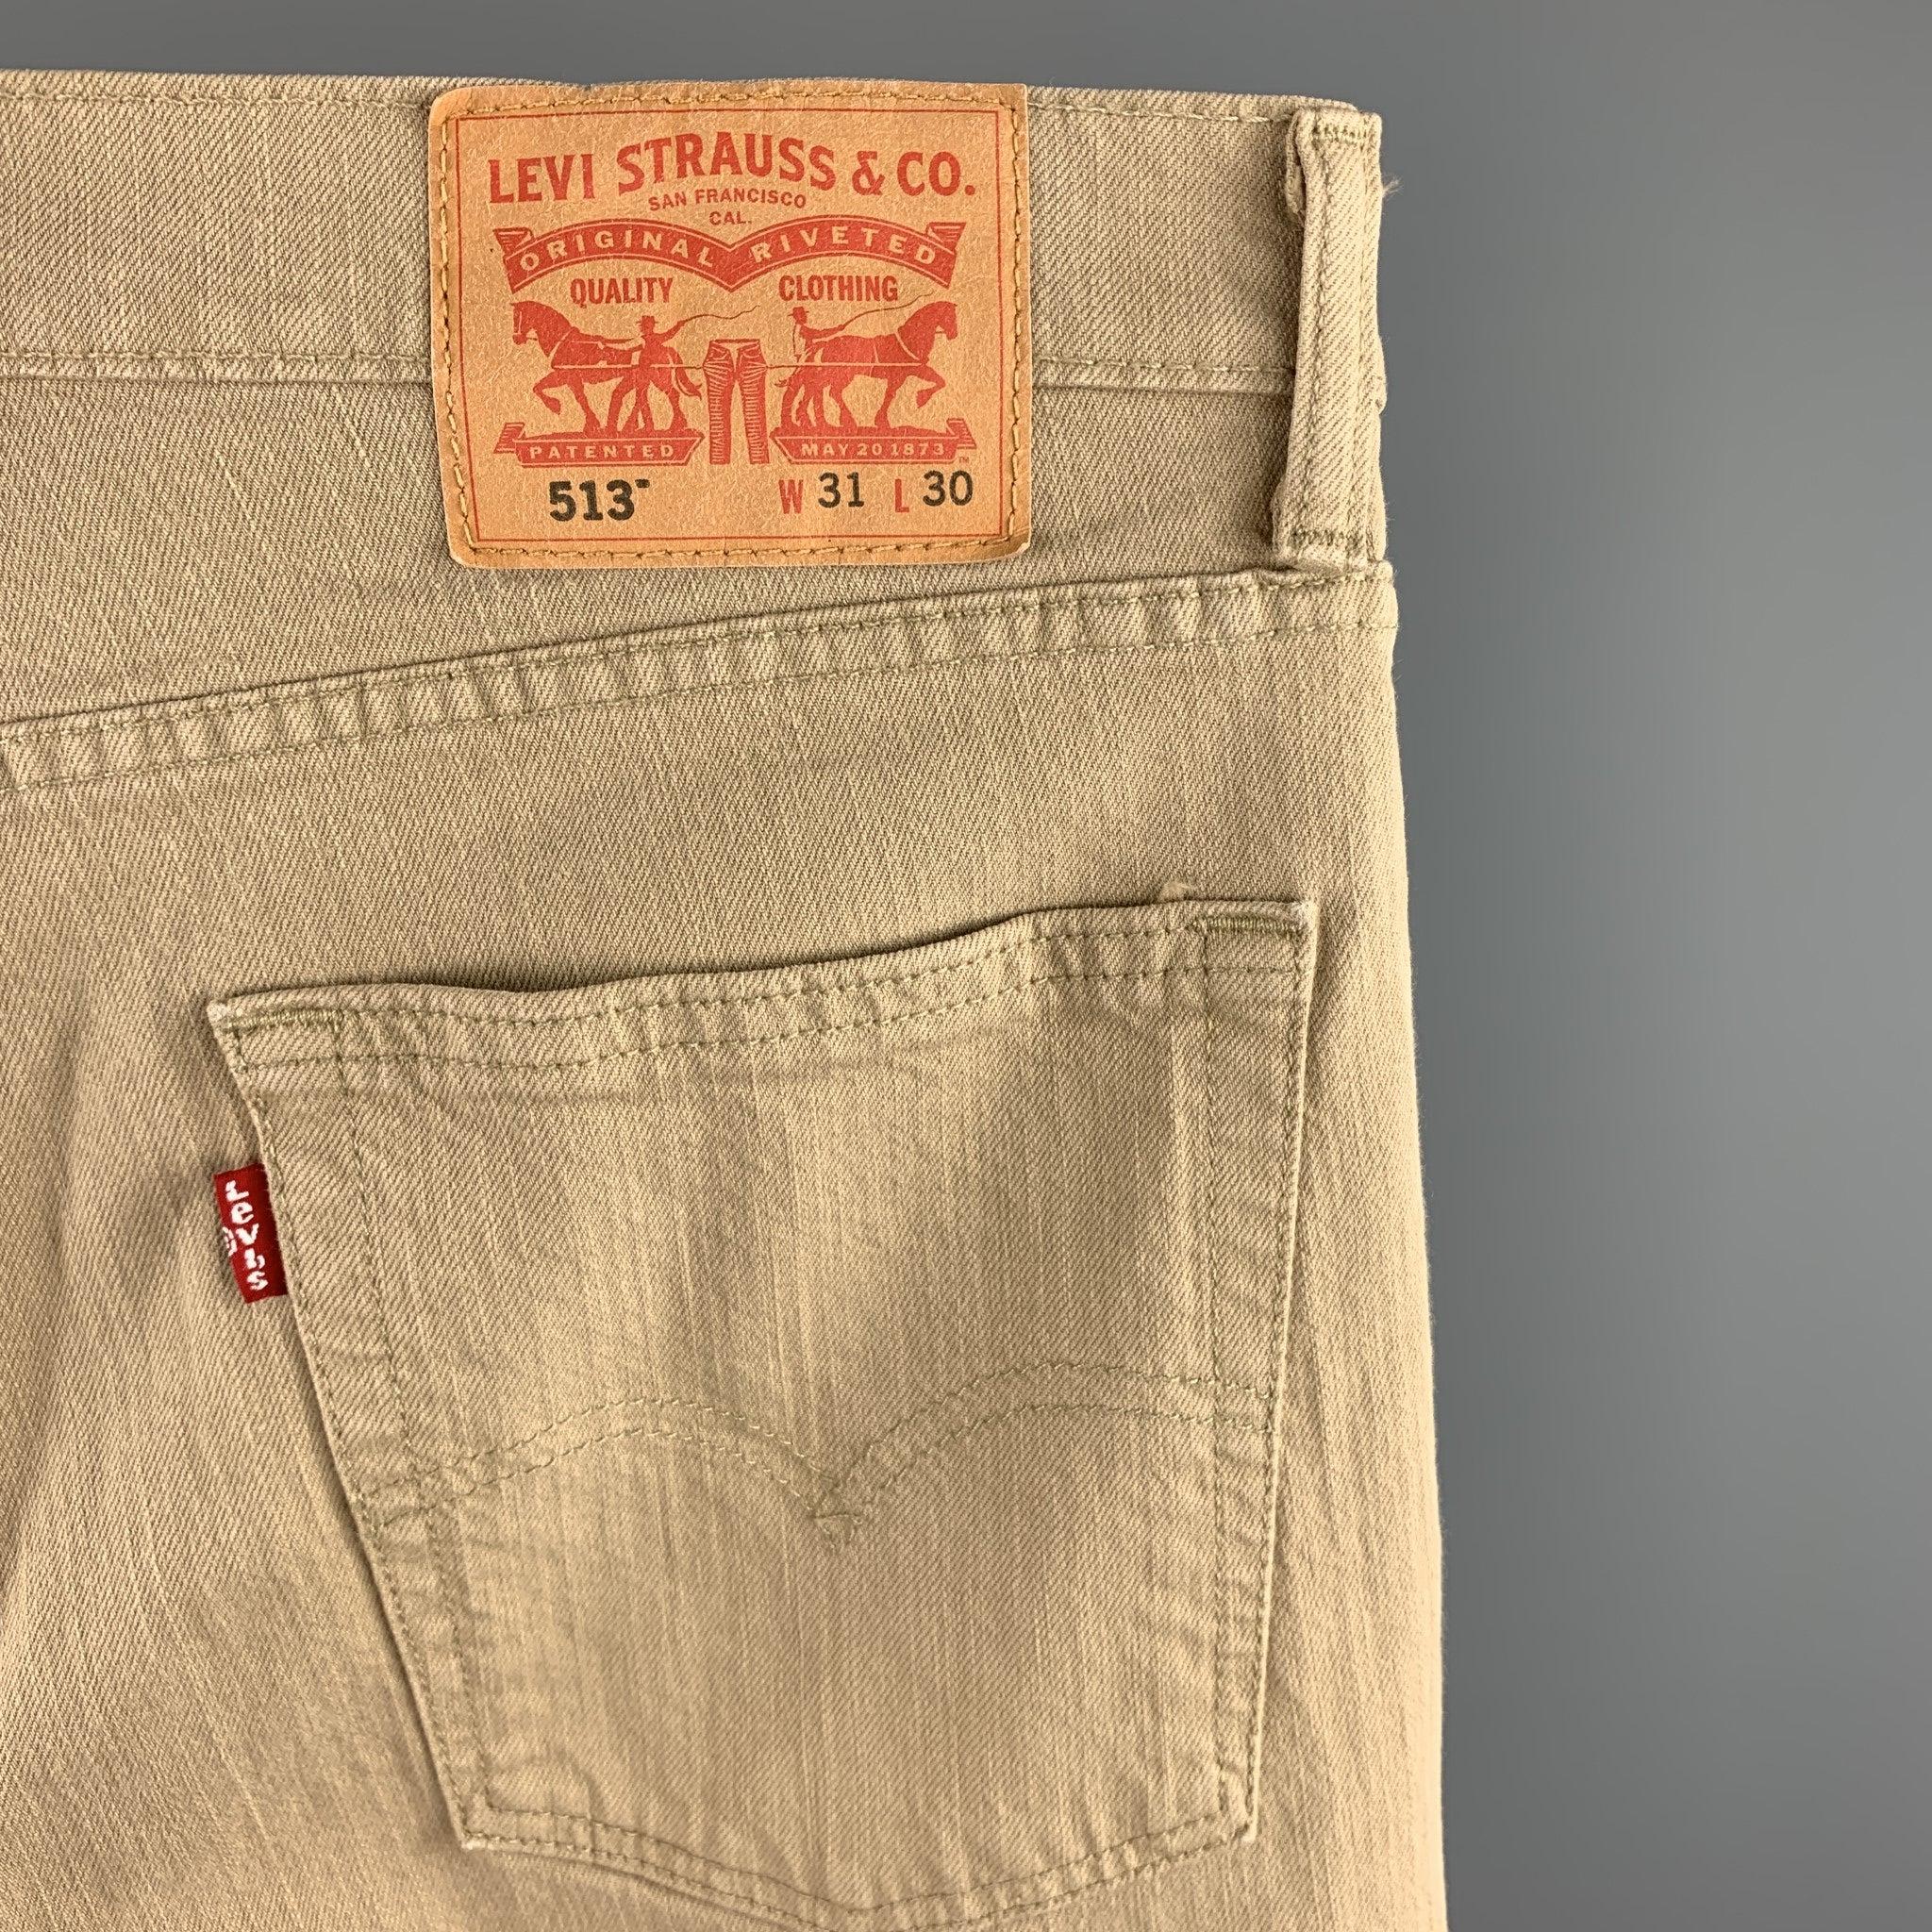 LEVI'S 513 Size 31 Khaki Denim Zip Fly Jeans In Good Condition For Sale In San Francisco, CA